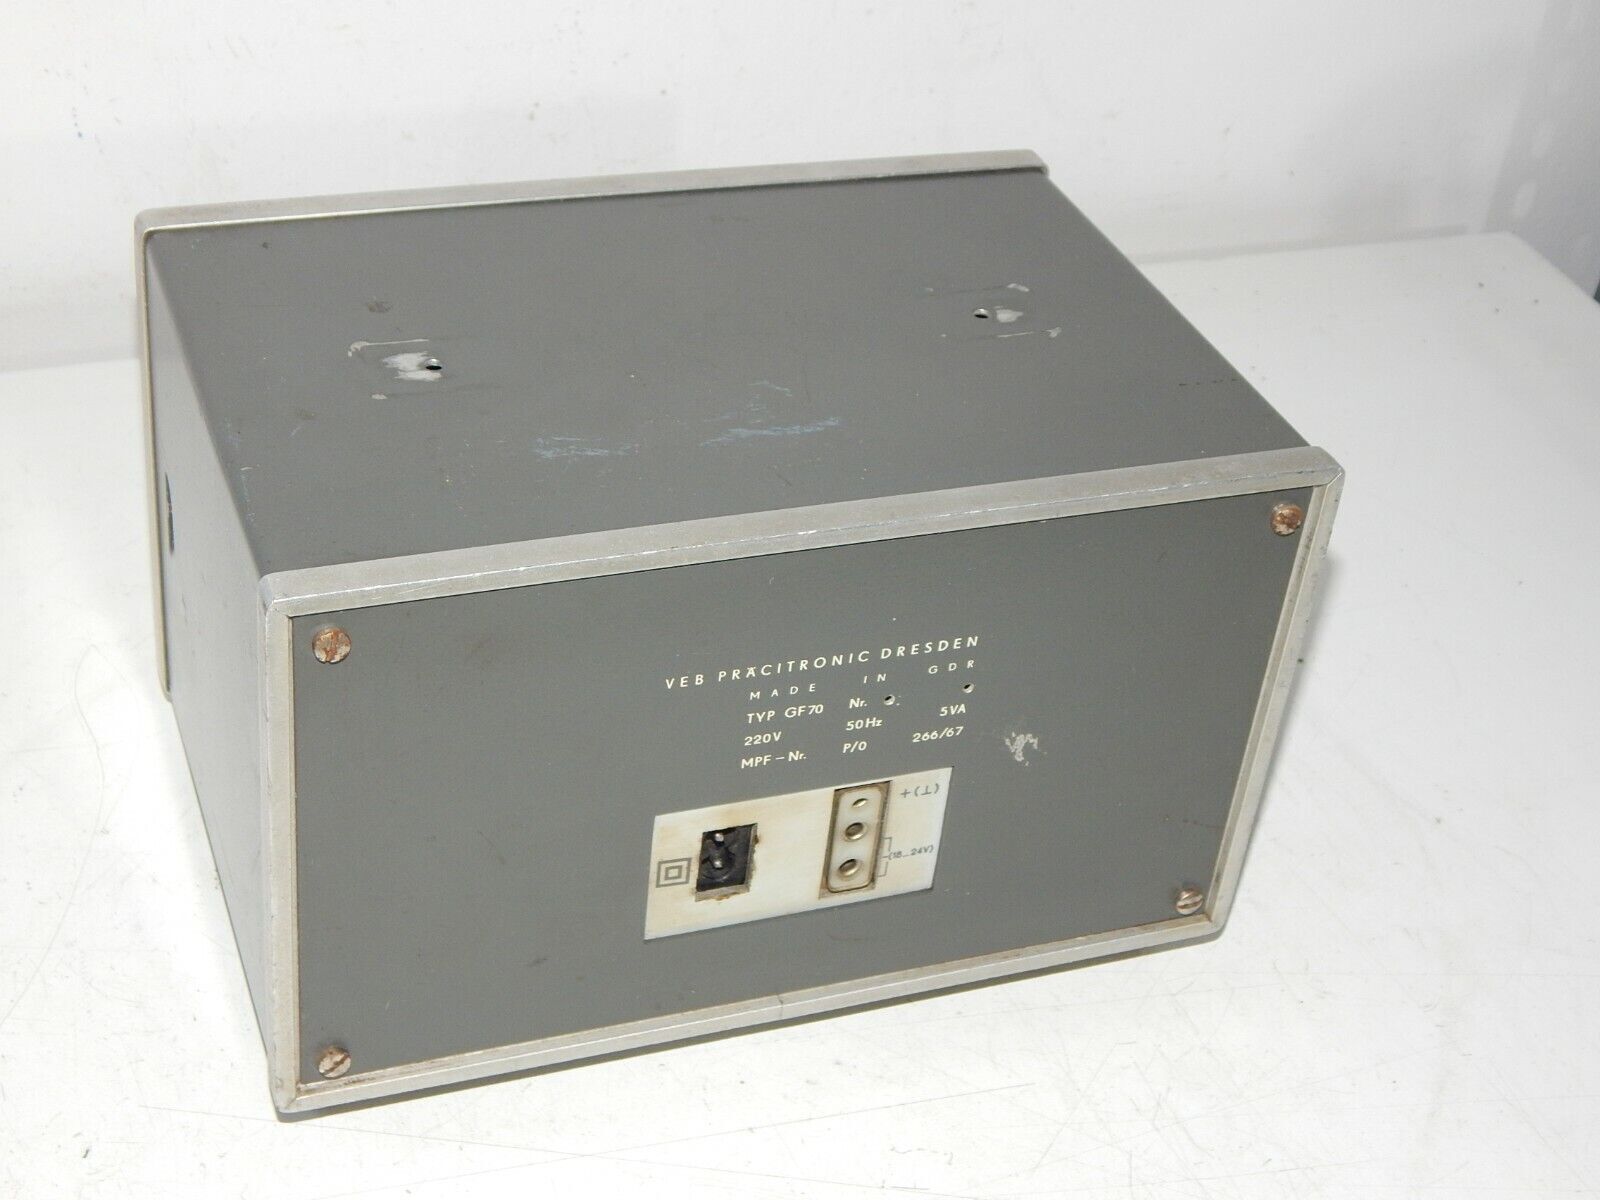 used Measuring device PRÄCITRONIC GF 70 low-frequency level generator 20 Hz - 20 kHz